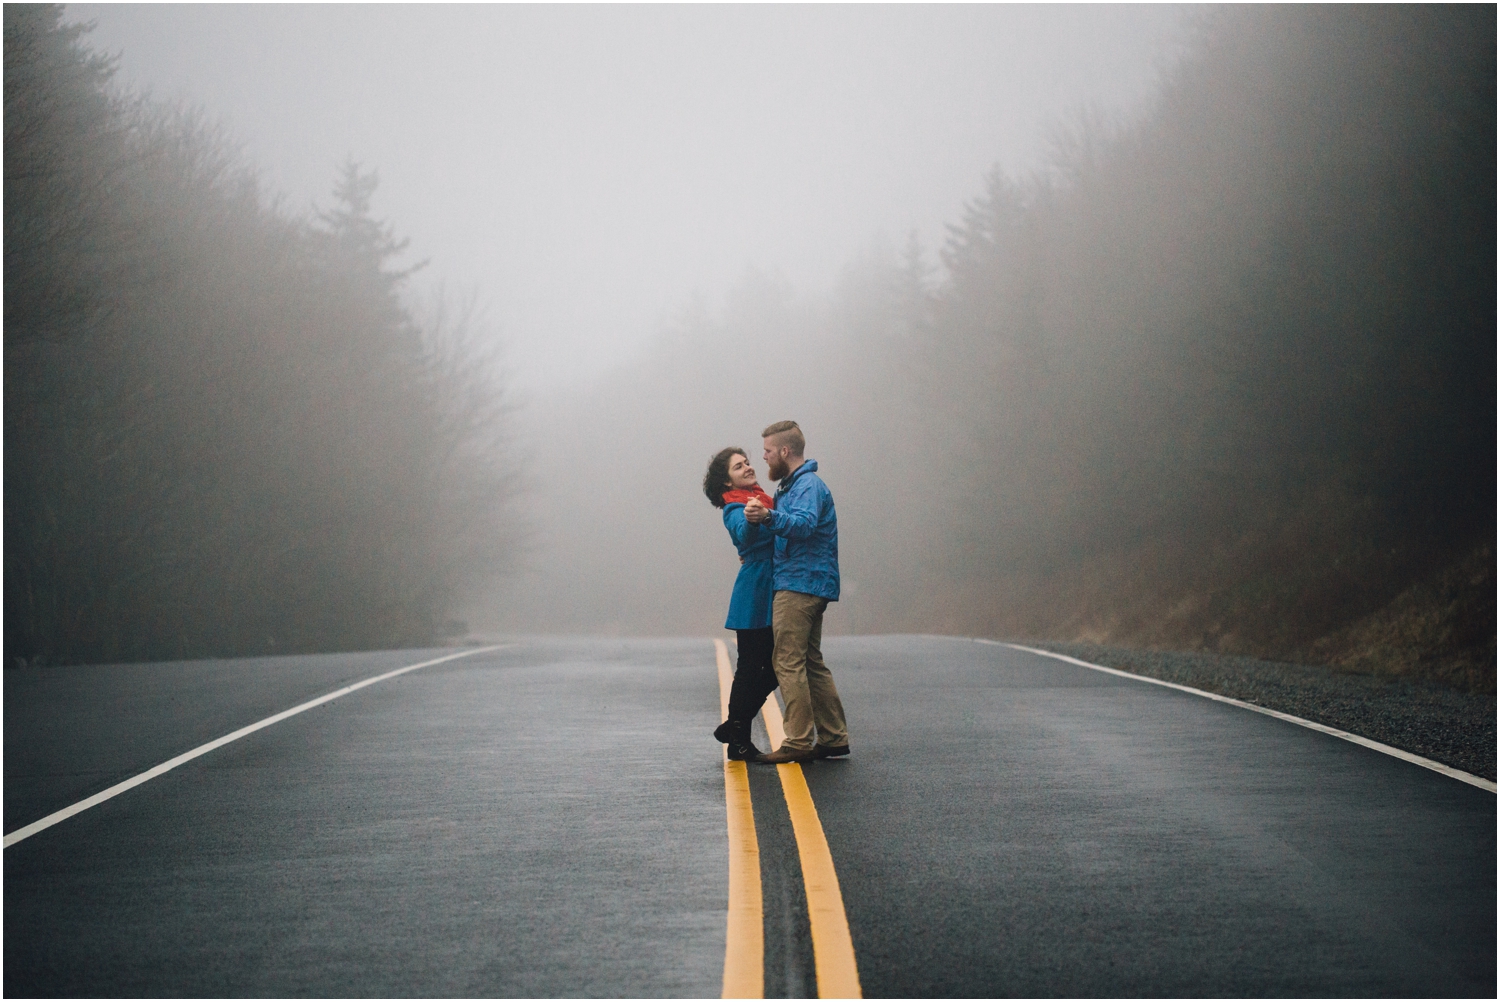 katy-sergent-photography-grayson-highlands-engagement-session-mouth-of-wilson-virginia-damascus-appalachian-trail-tennessee-wedding-elopement_0028.jpg